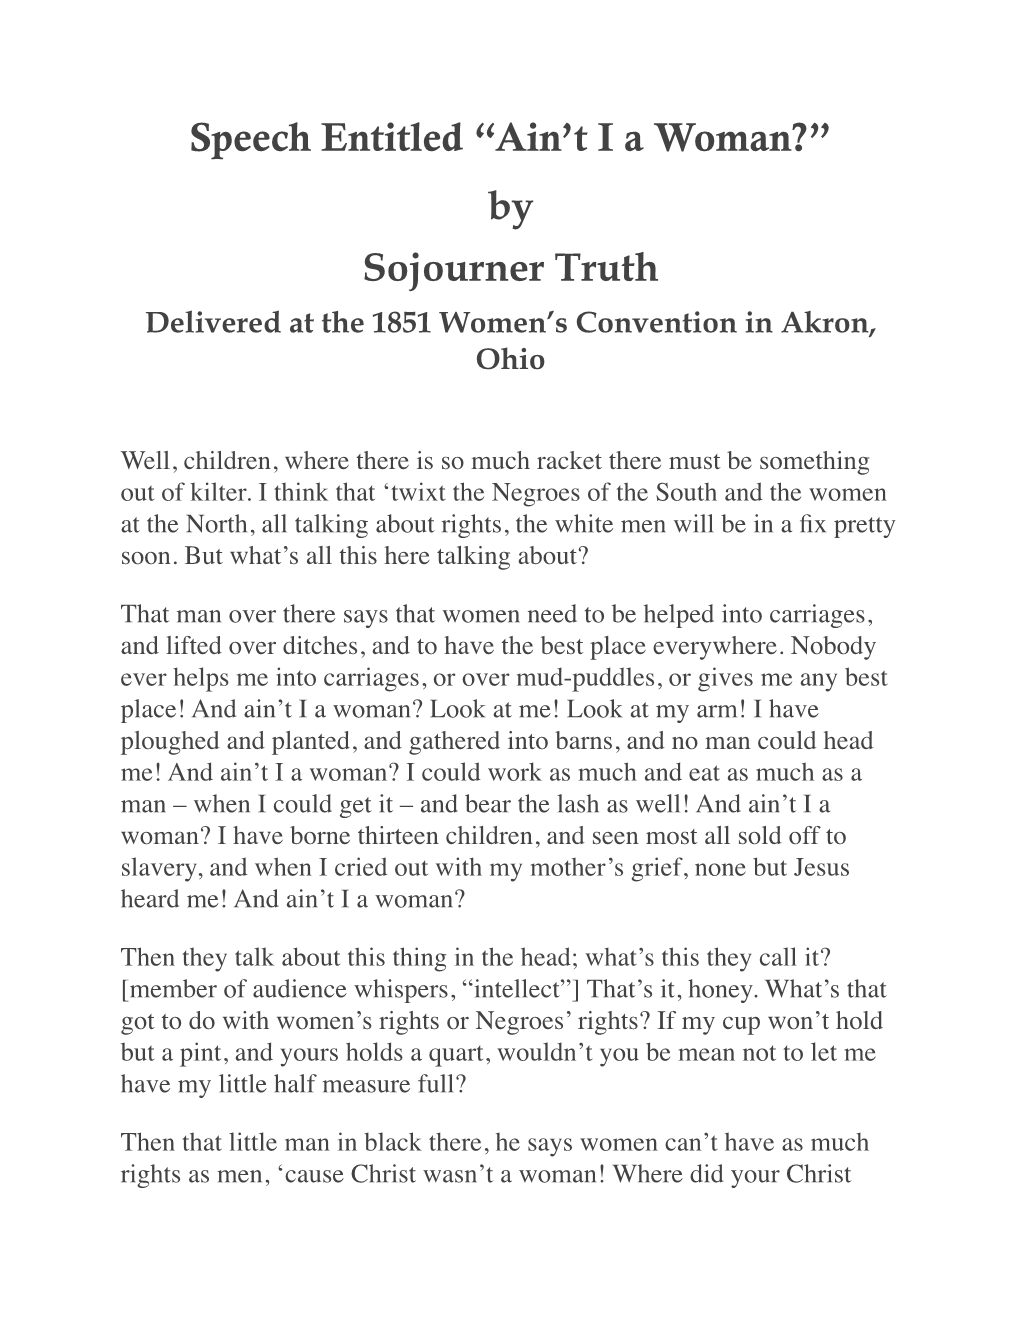 Speech Entitled “Ain't I a Woman?” by Sojourner Truth